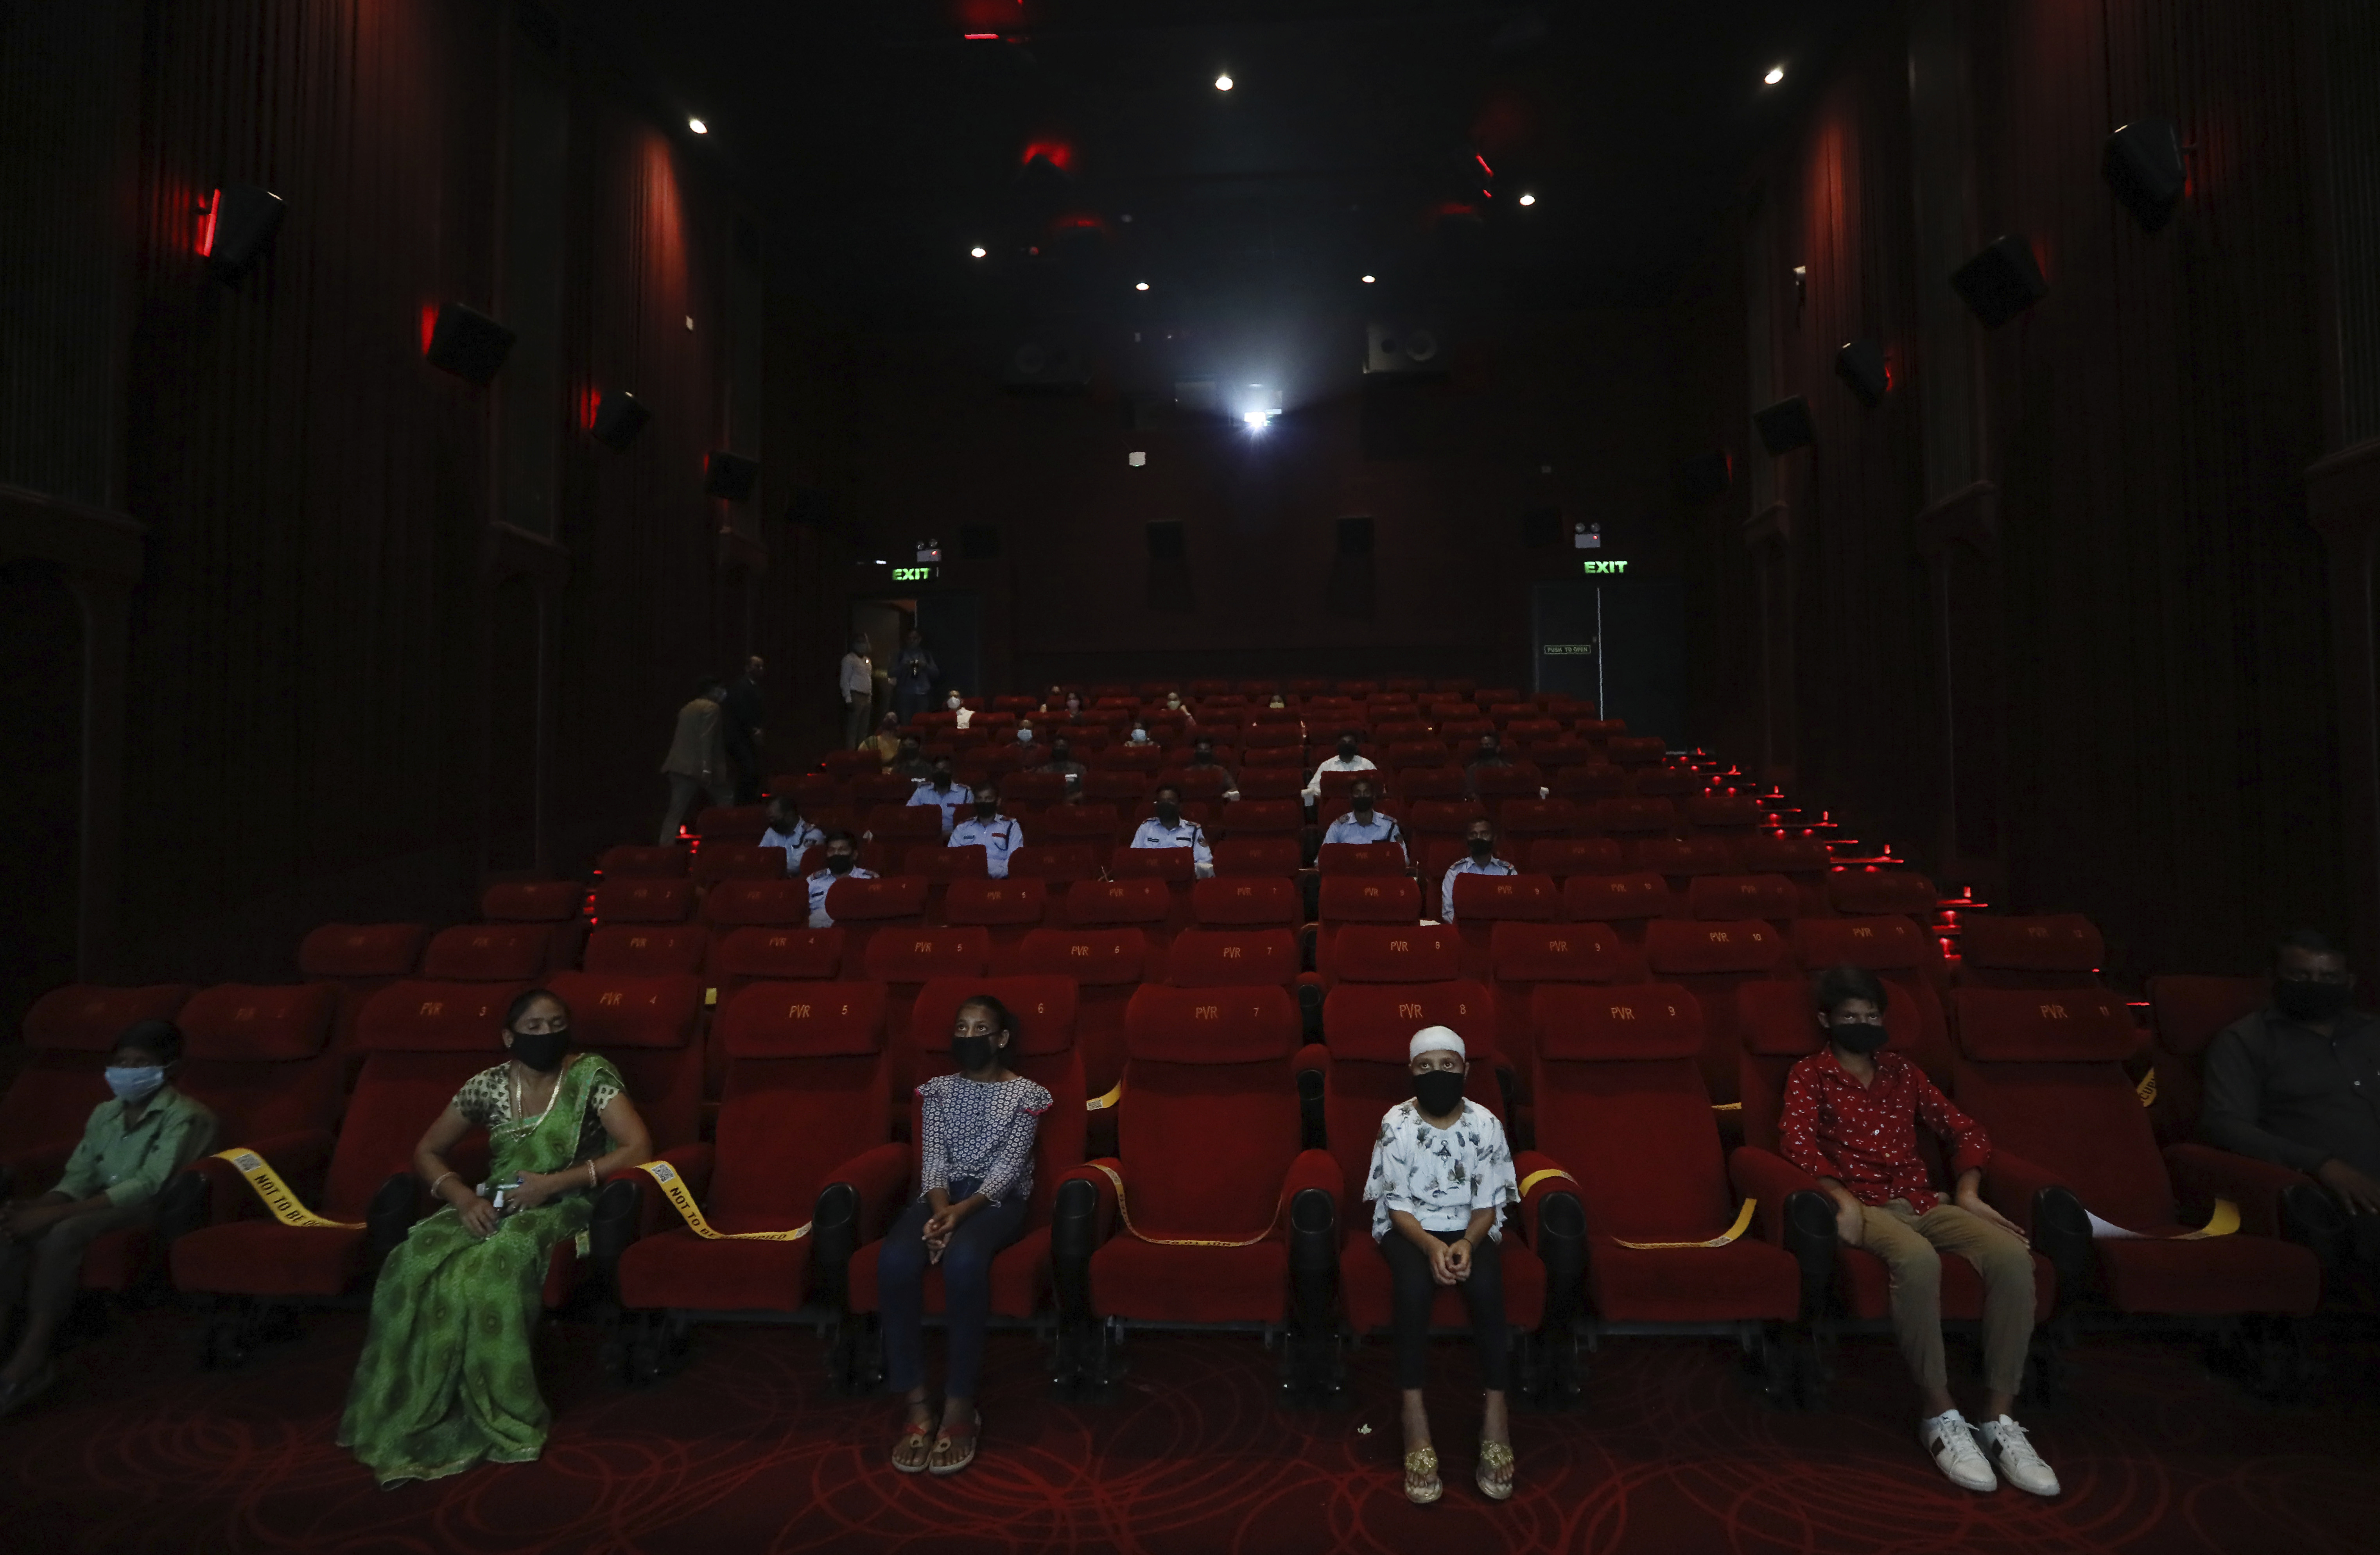 People watch an Indian Bollywood movie as cinemas reopen with a special screening for COVID- 19 warriors and their families at the PVR movie theater in New Delhi, India, Thursday, Oct. 15, 2020. Seven months after screens went dark, cinemas reopened Thursday in much of India with mostly old titles on the marquee u2014 a sign of the countryu2019s efforts to return to normal as the pace of coronavirus infections slows but also of the roadblocks that remain. (AP Photo/Manish Swarup)